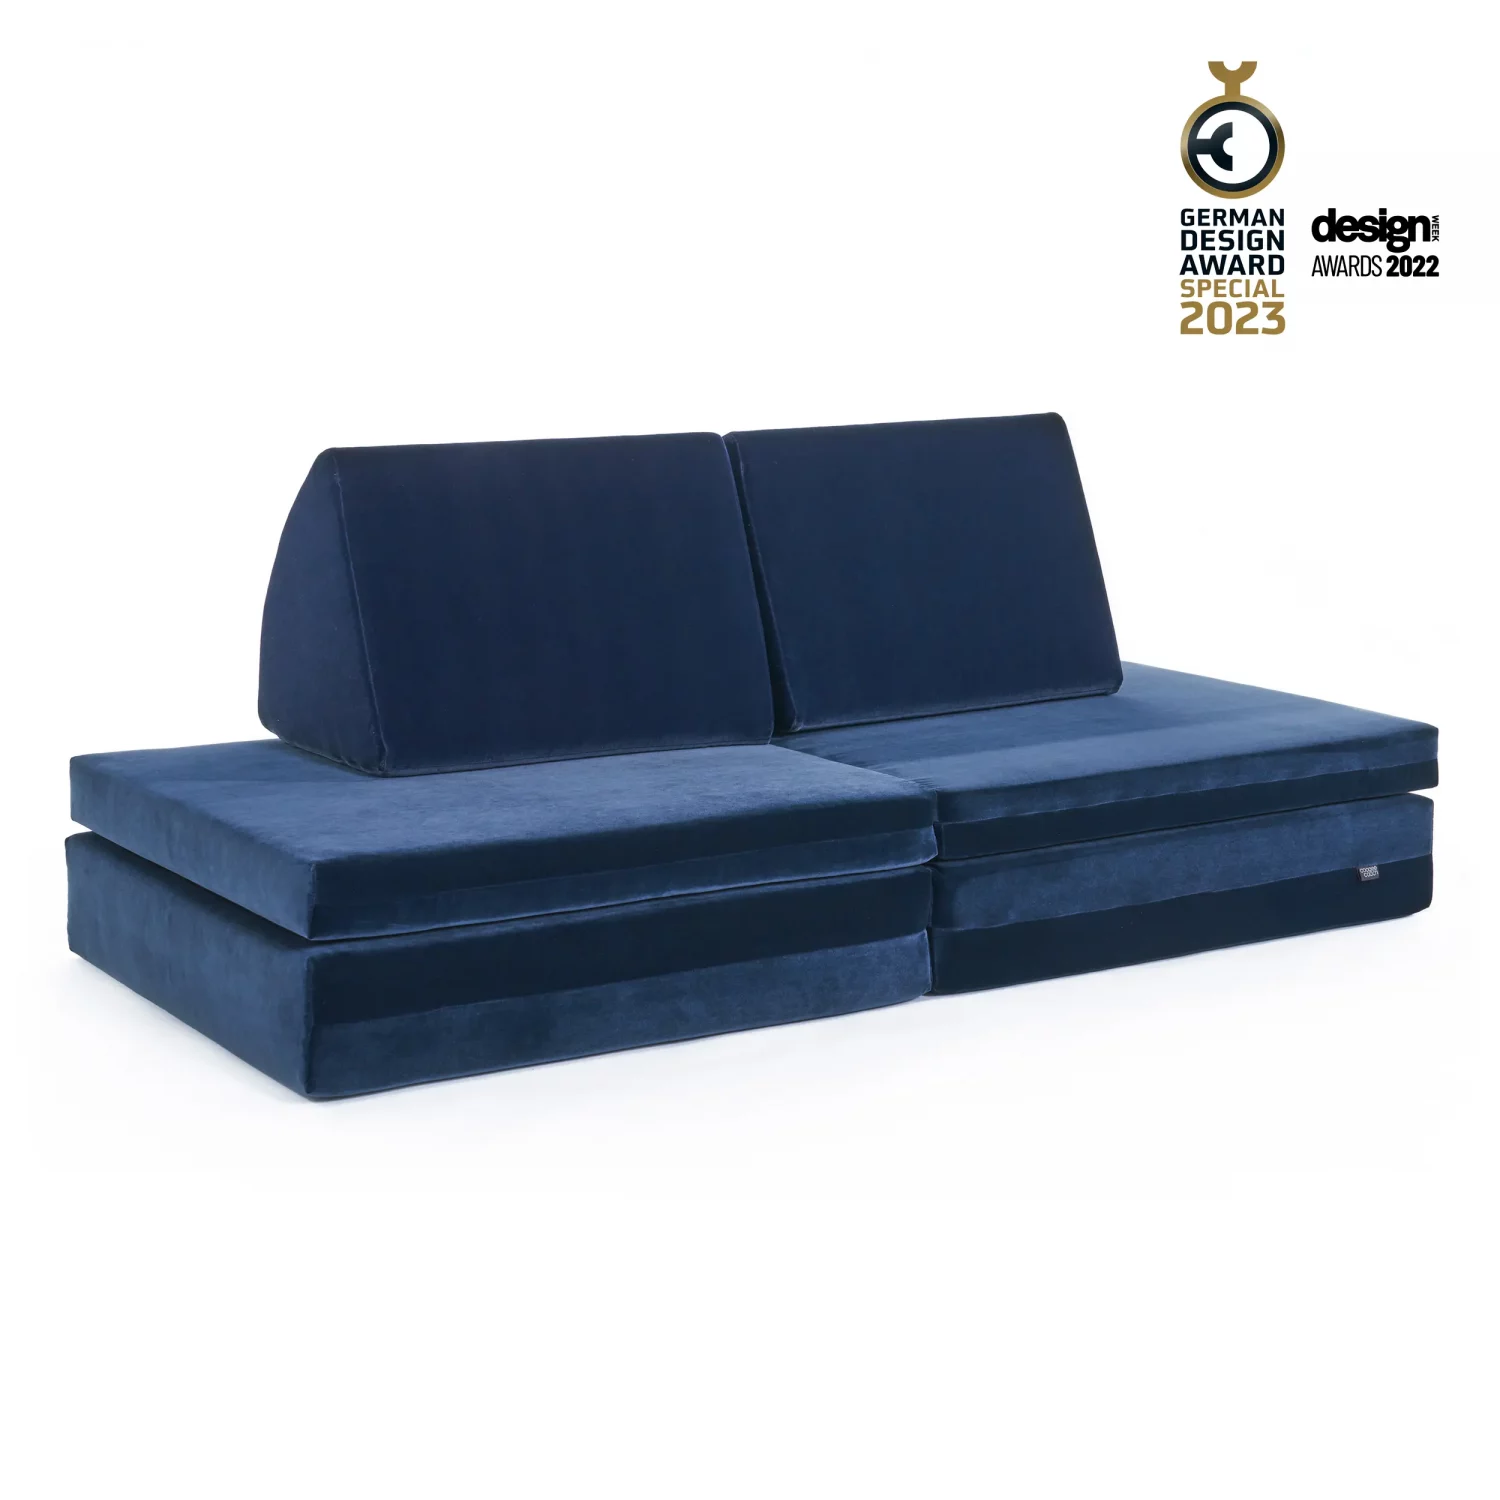 coogeecouch | Award | German Design Award 2023  | Kindersofa | Serie: youniverse | Farbe: night-blue dunkelbau | Ansicht: Front schräg | made in Germany